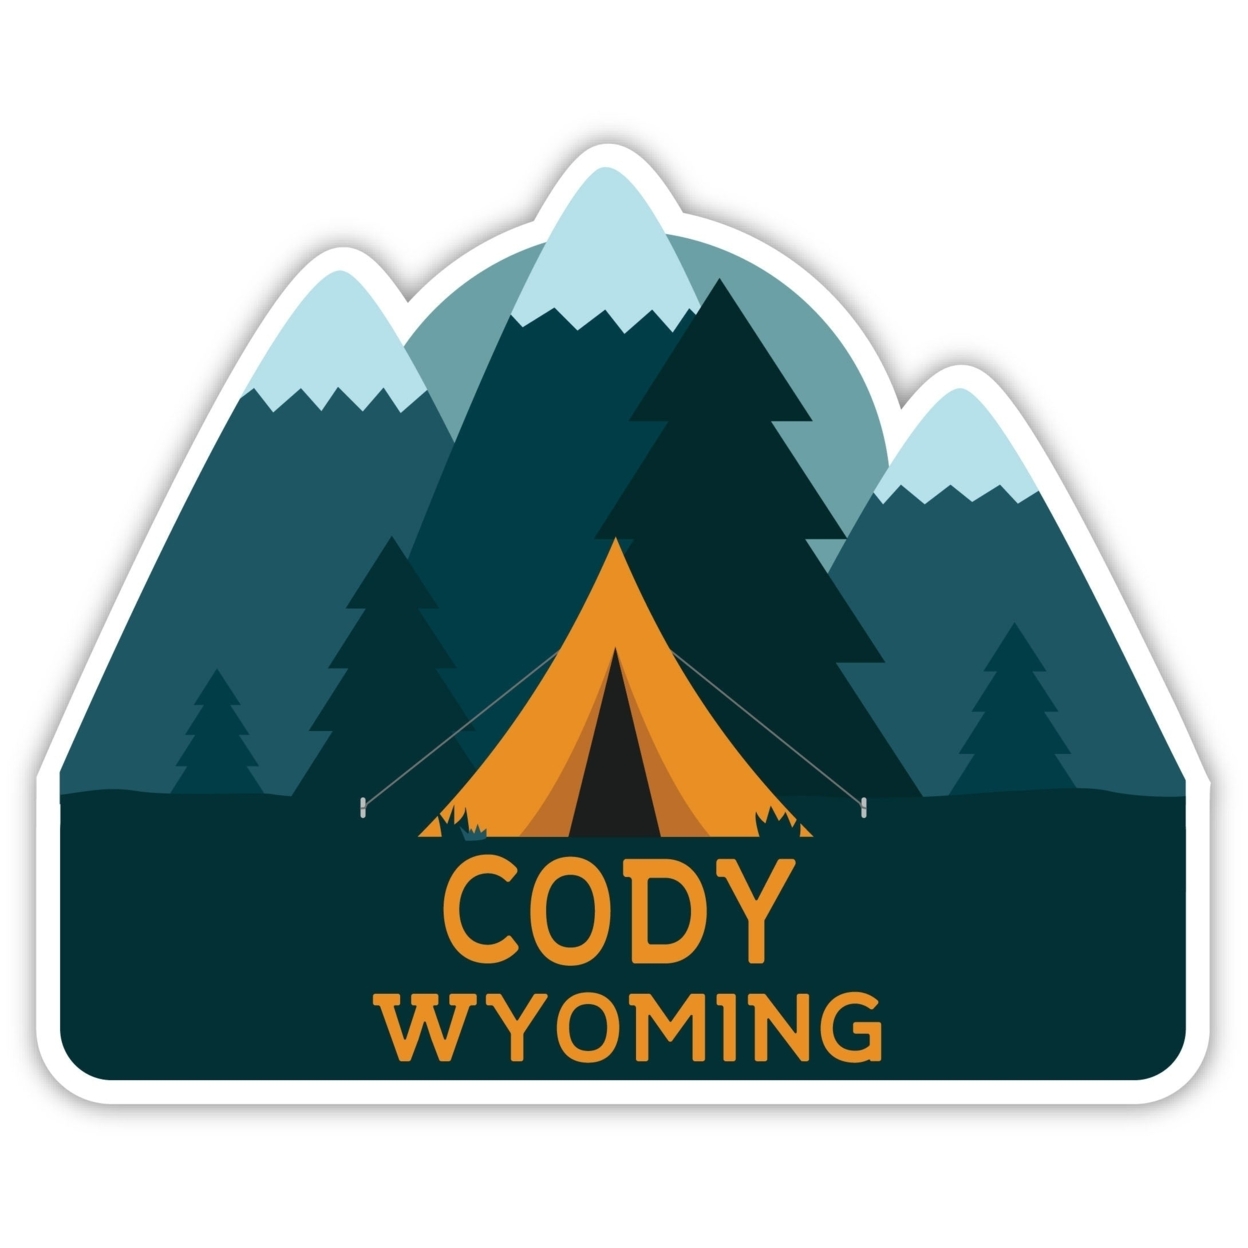 Cody Wyoming Souvenir Decorative Stickers (Choose Theme And Size) - Single Unit, 8-Inch, Camp Life